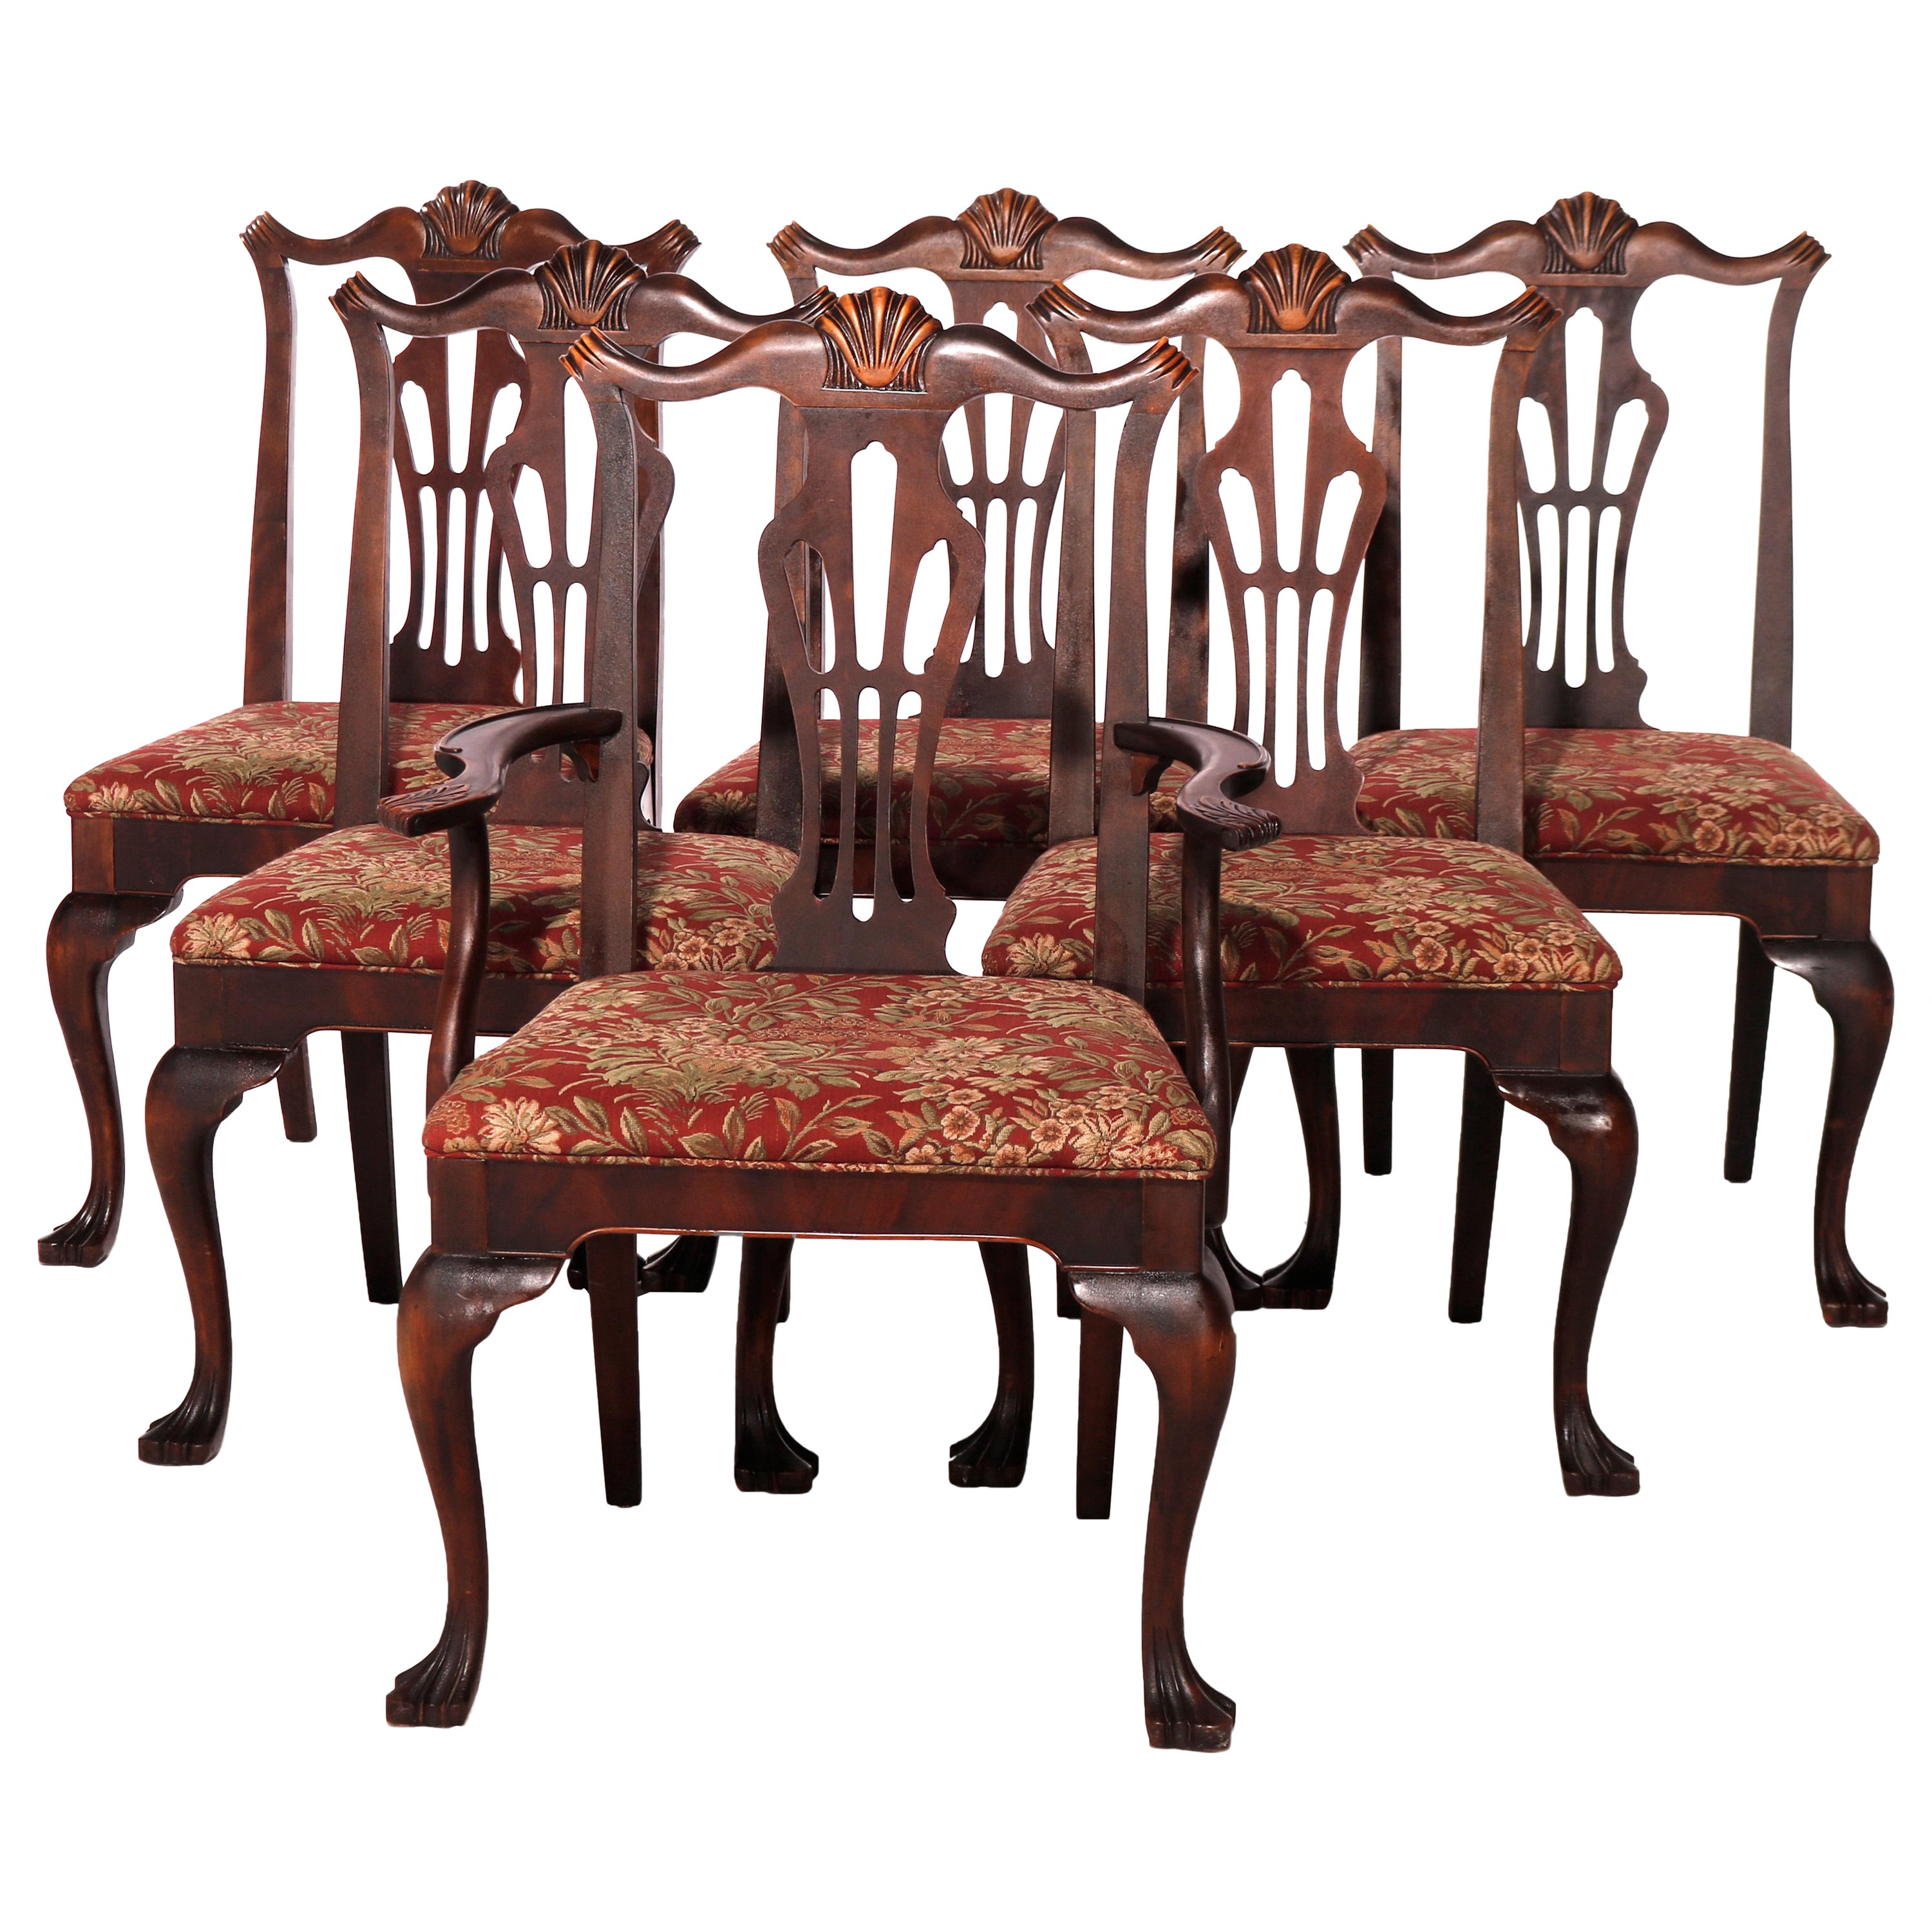 Six Antique Chippendale Style Mahogany Slat Back Dining Chairs, c1930 For Sale